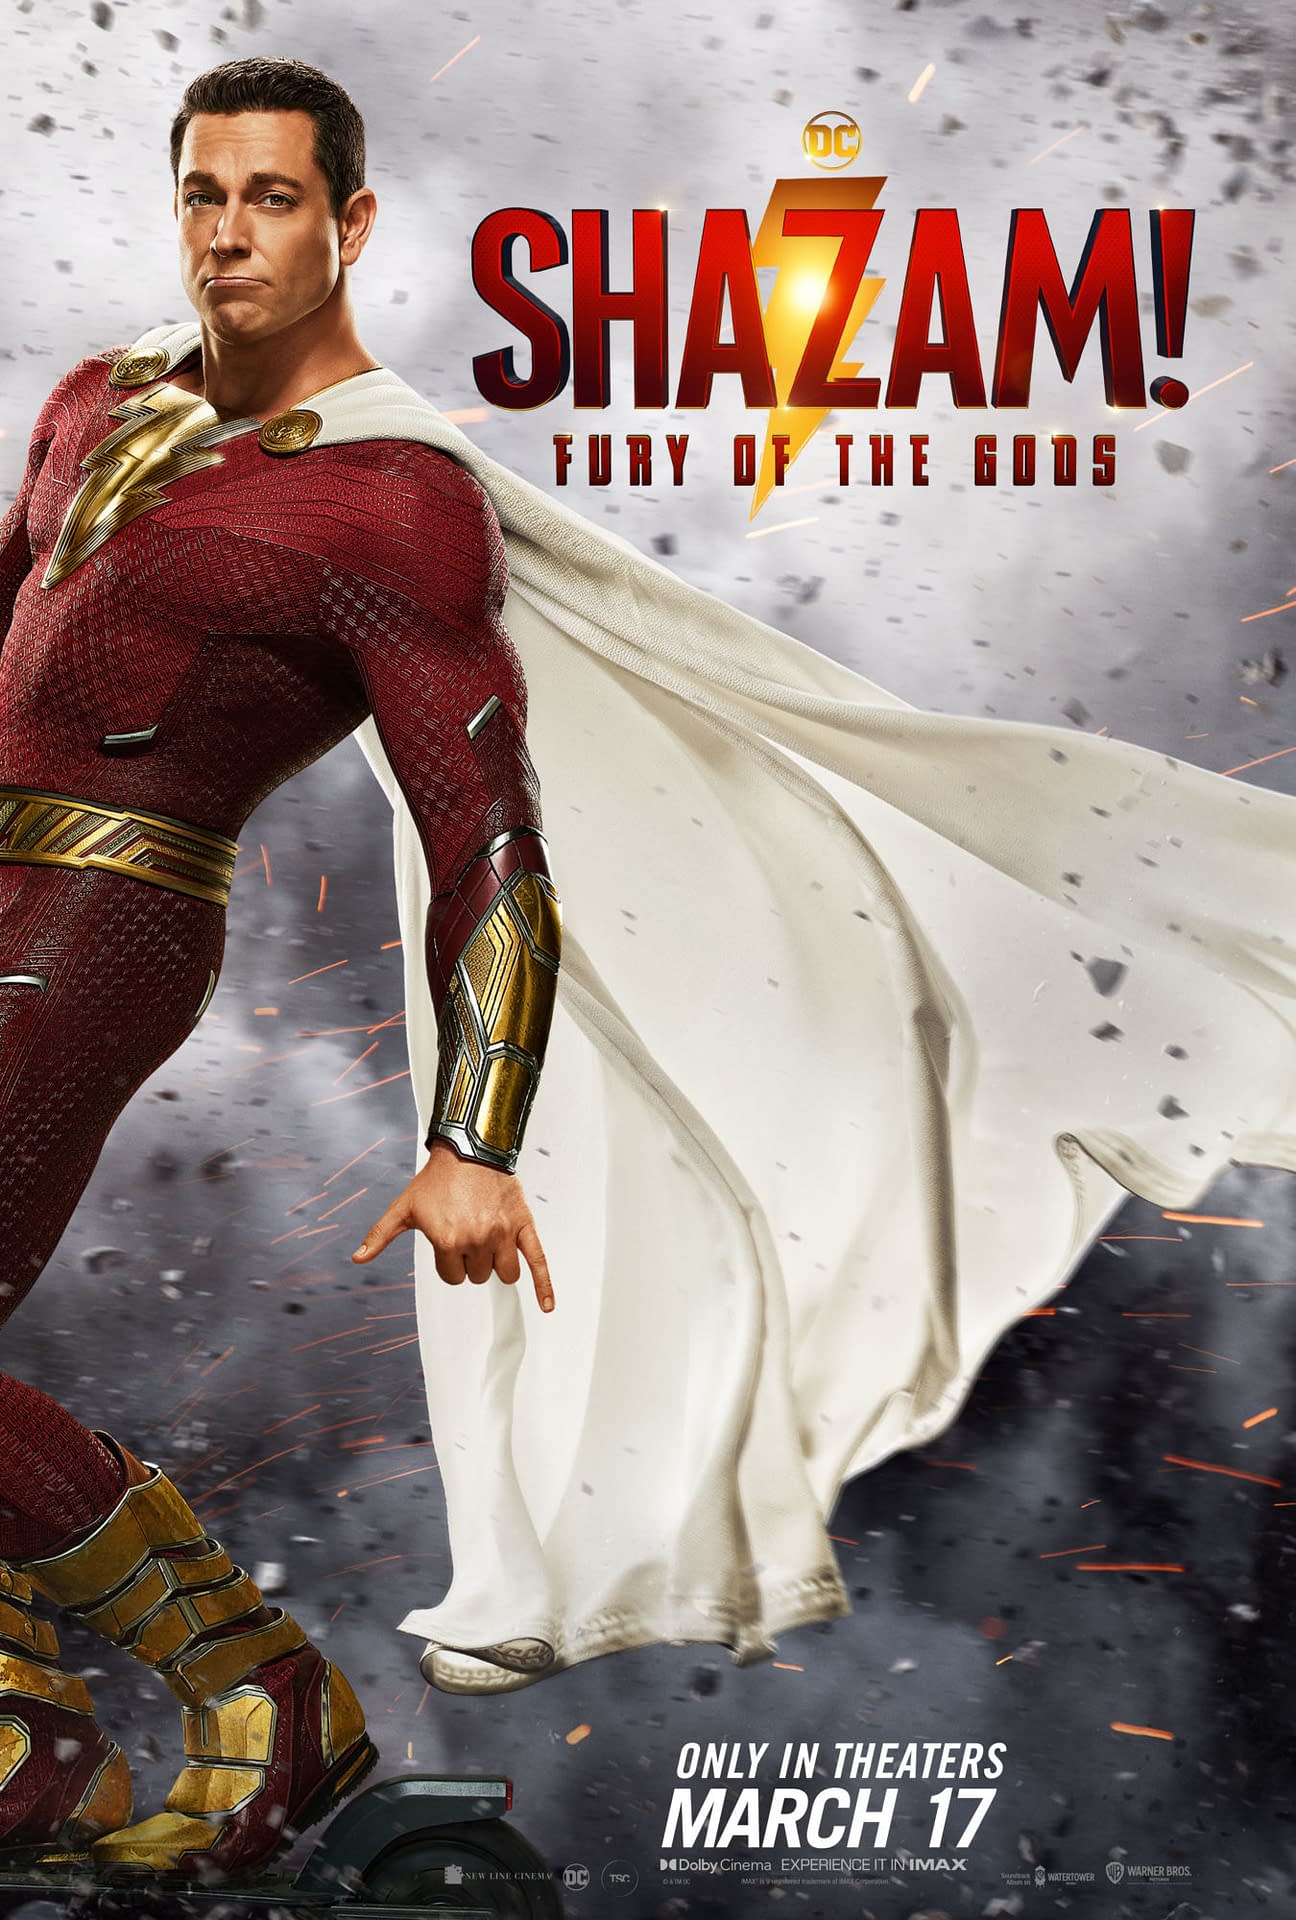 Shazam Fury of The Gods: Lucy Liu Joins Cast For Sequel At New